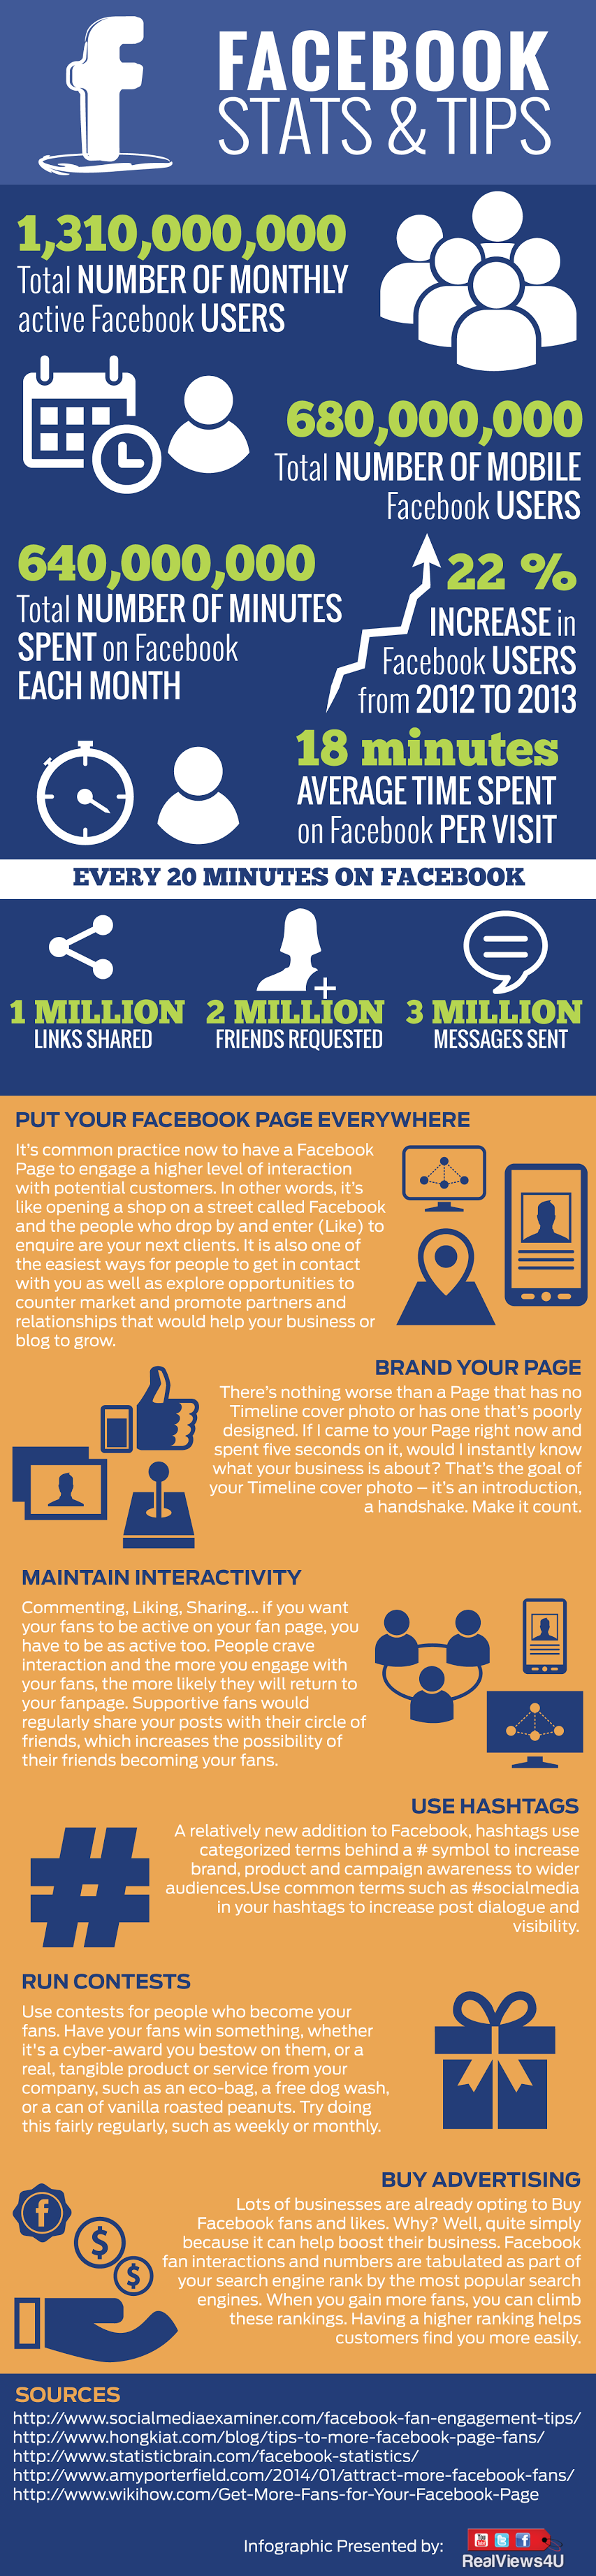 #Facebook Stats And Tip For Businesses - #infographic #socialmedia